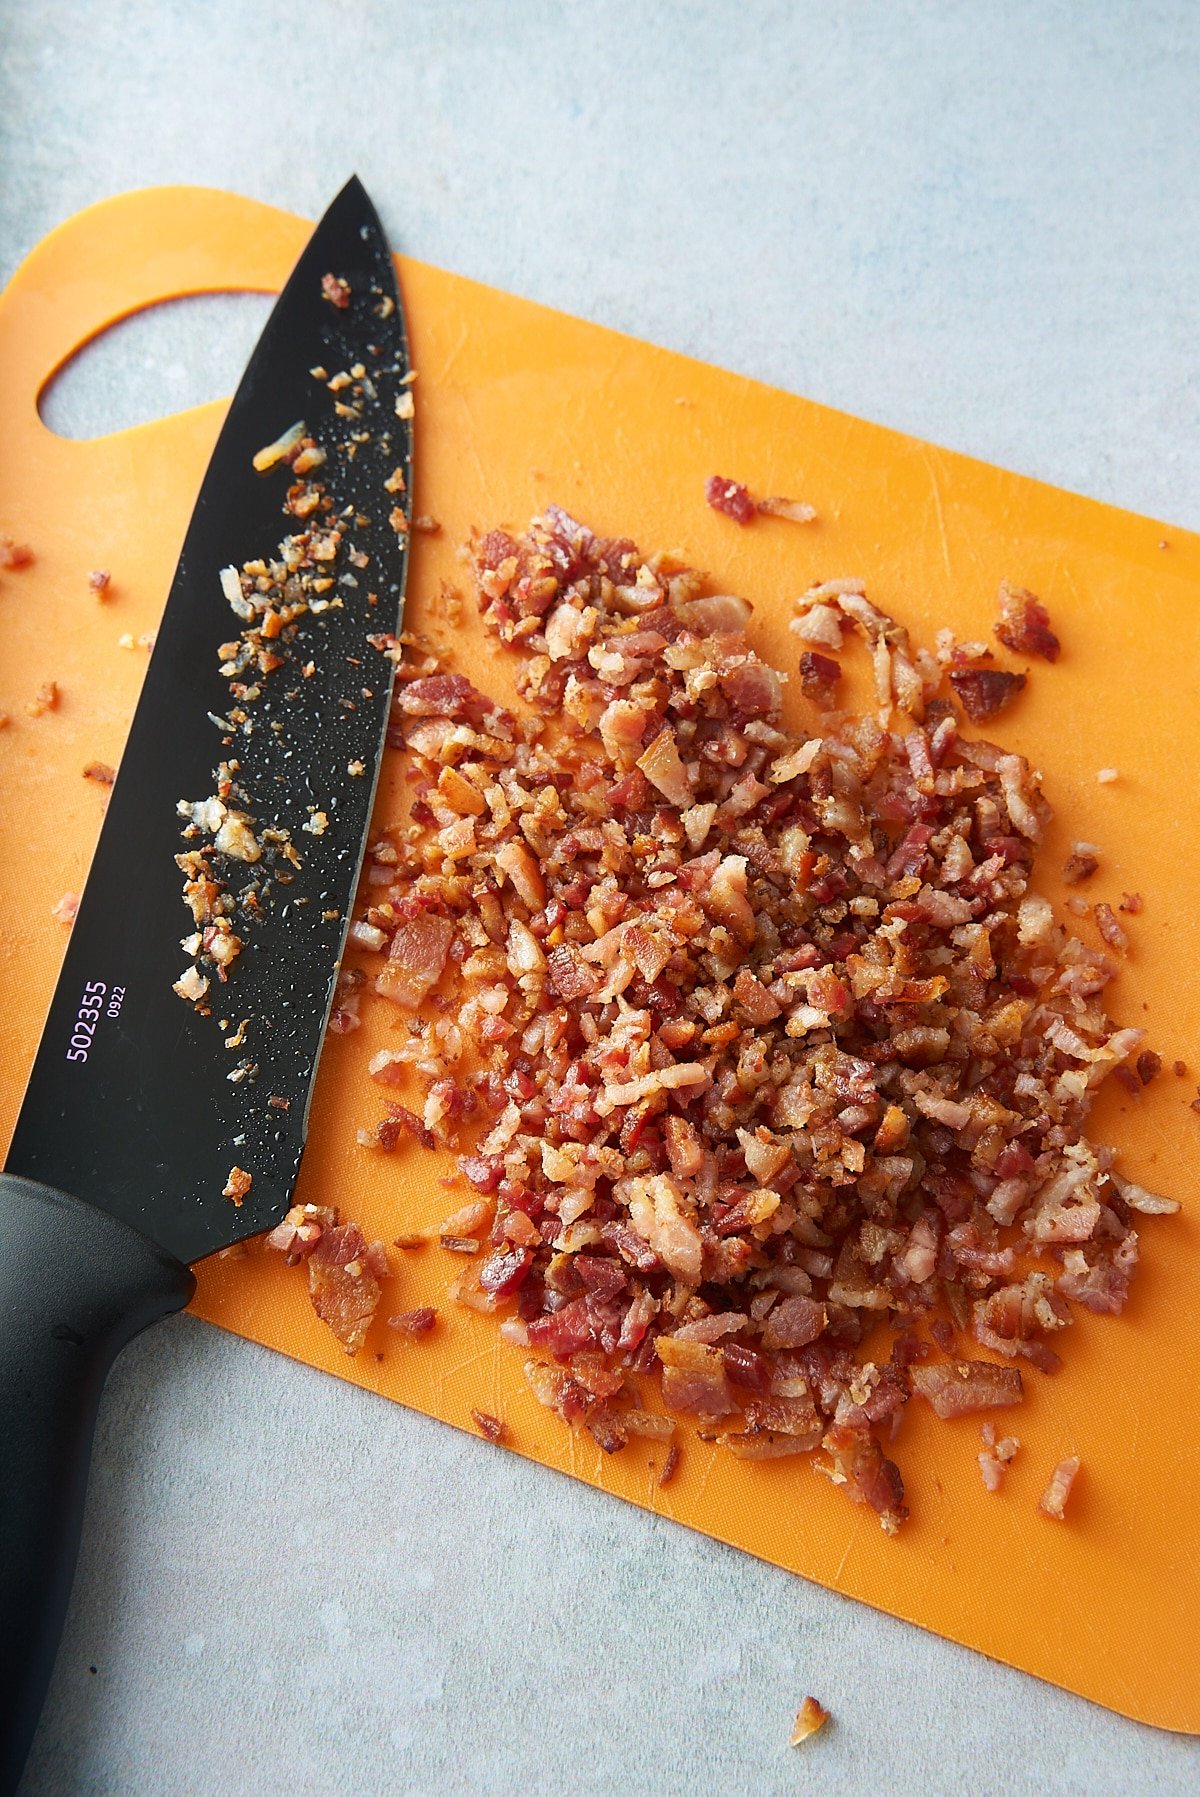 A chopping board of cooked, chopped bacon pieces, with a large kitchen knife set alongside.